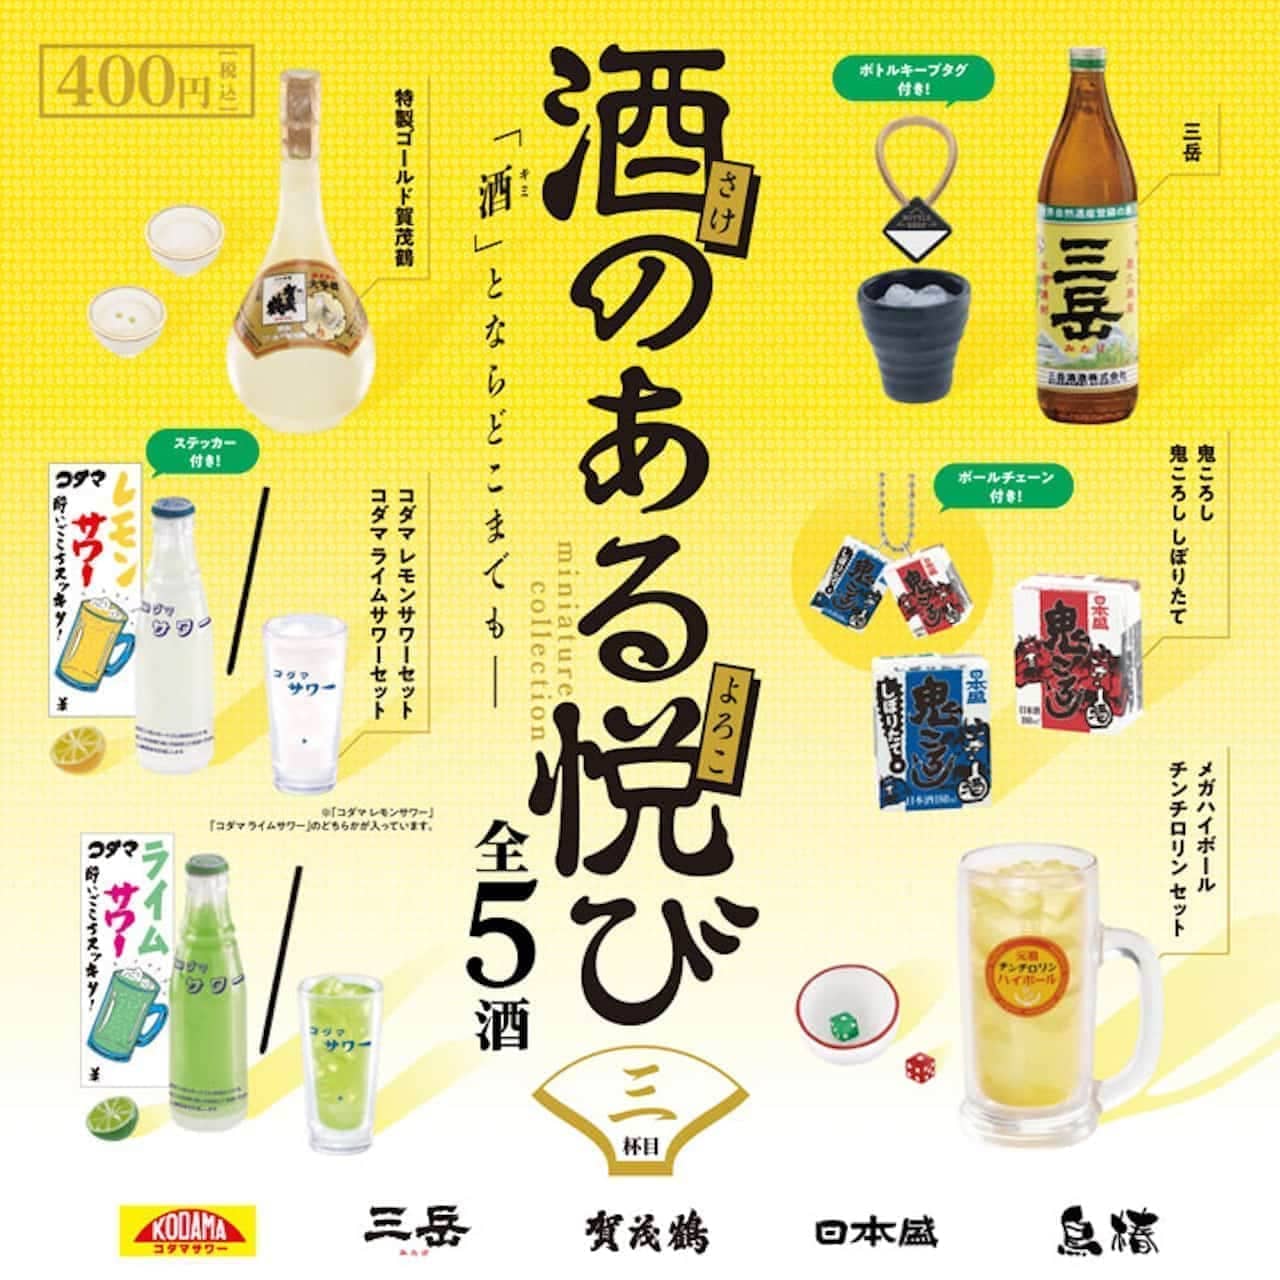 The third edition of the "Pleasure with Sake Miniature Collection" from KenElephant.